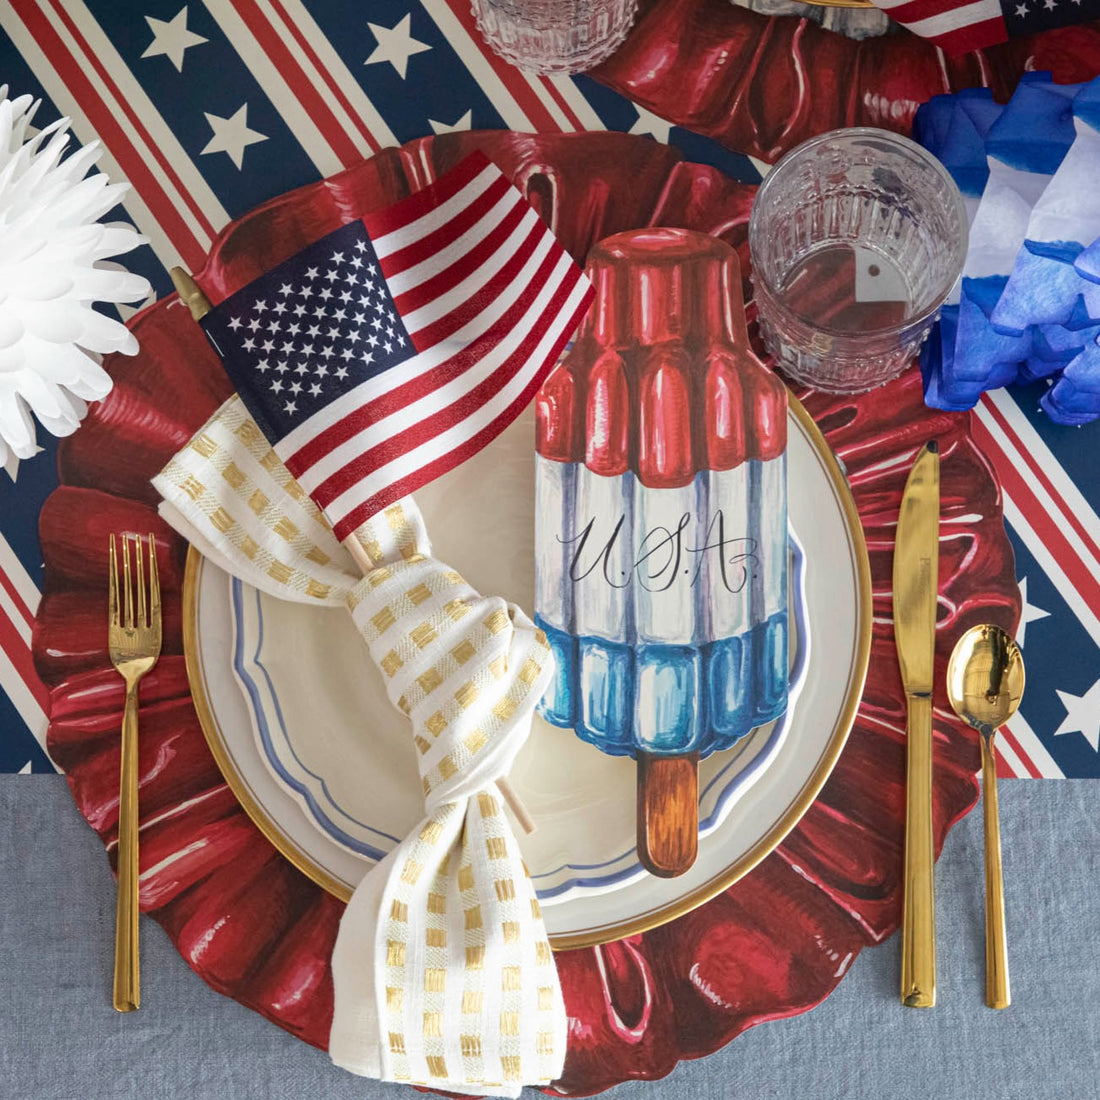 The Die-cut Star-Spangled Placemat under a patriotic table setting, from above.